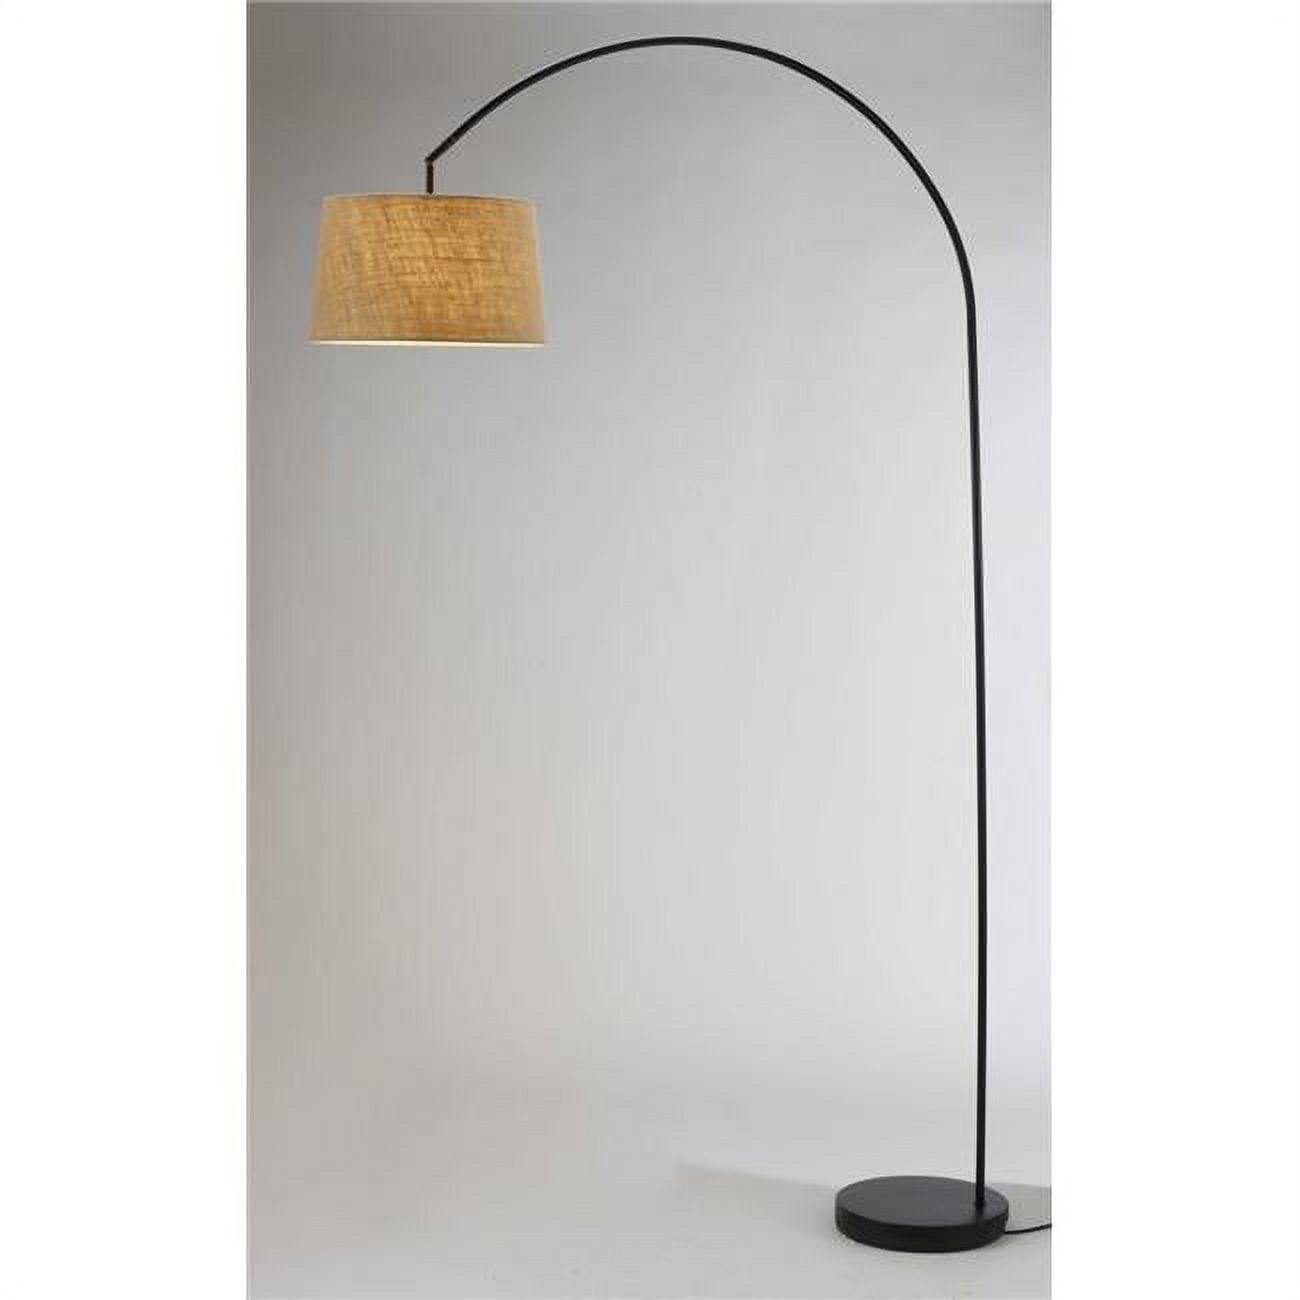 Sweeping Curve Adjustable Arc Floor Lamp with Burlap Shade